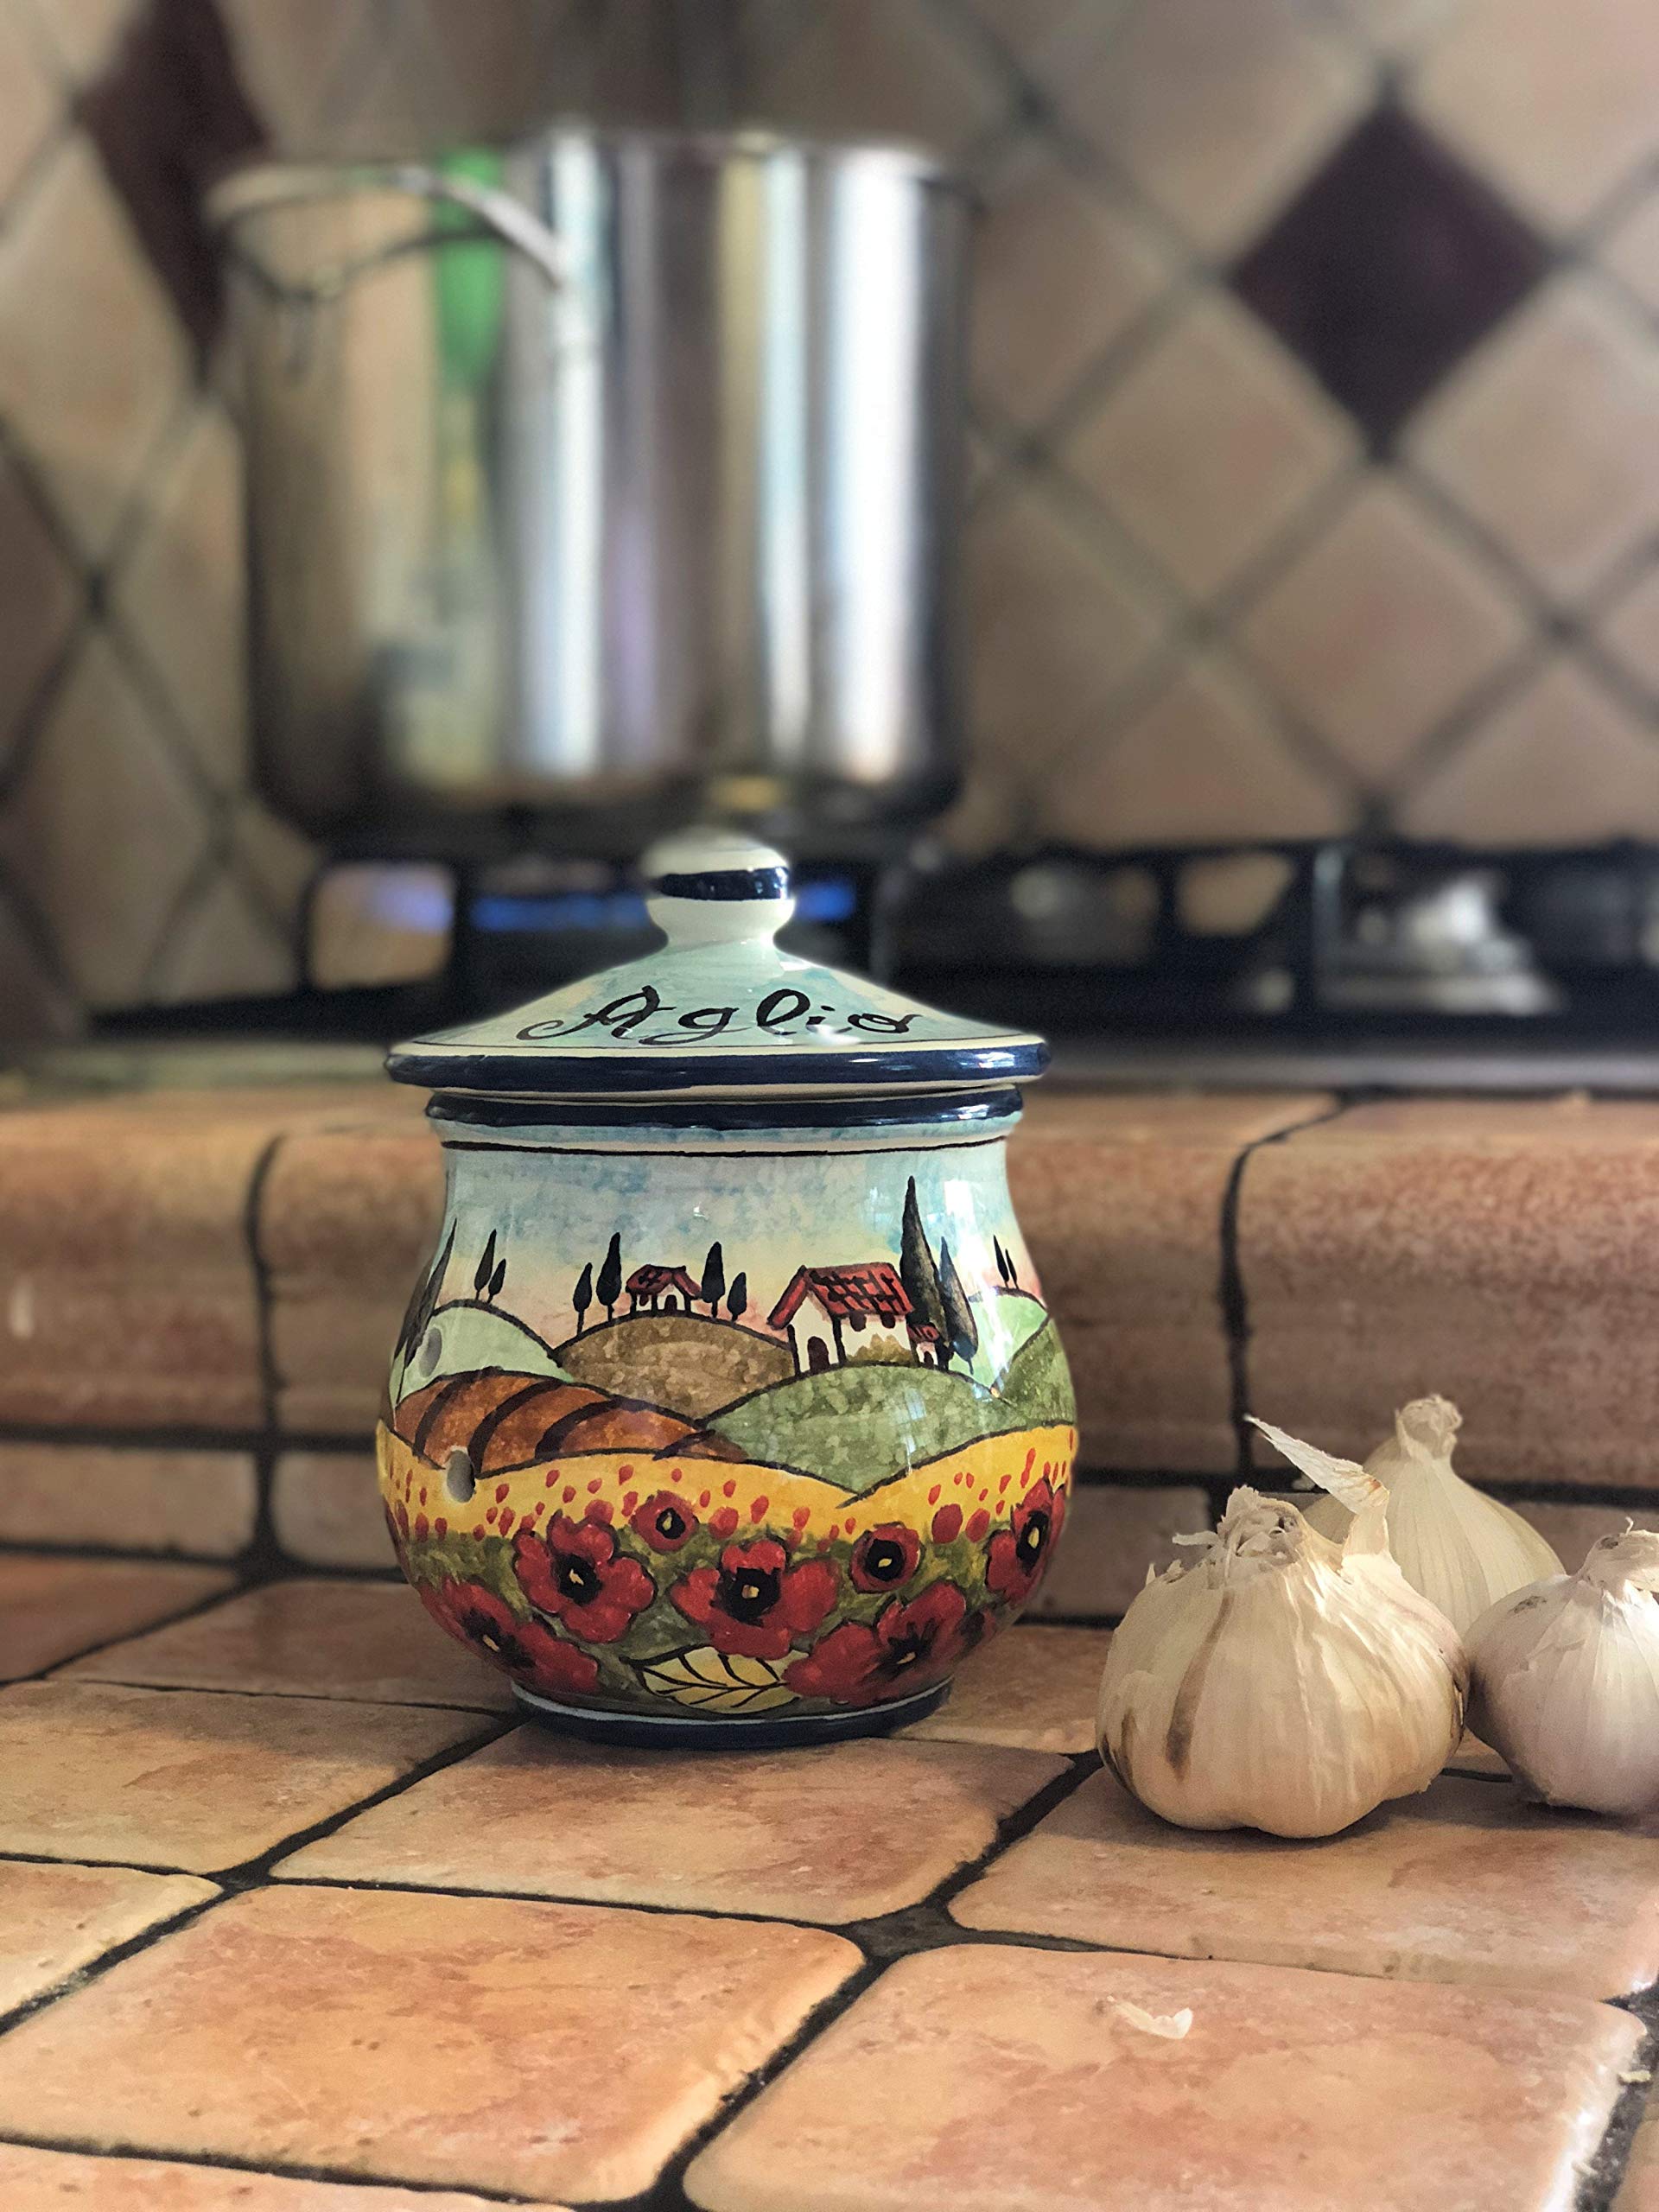 CERAMICHE D'ARTE PARRINI- Italian Ceramic Garlic Brings Jar Holder Hand Painted Made in ITALY Decorated Poppies Landscape Tuscan Art Pottery